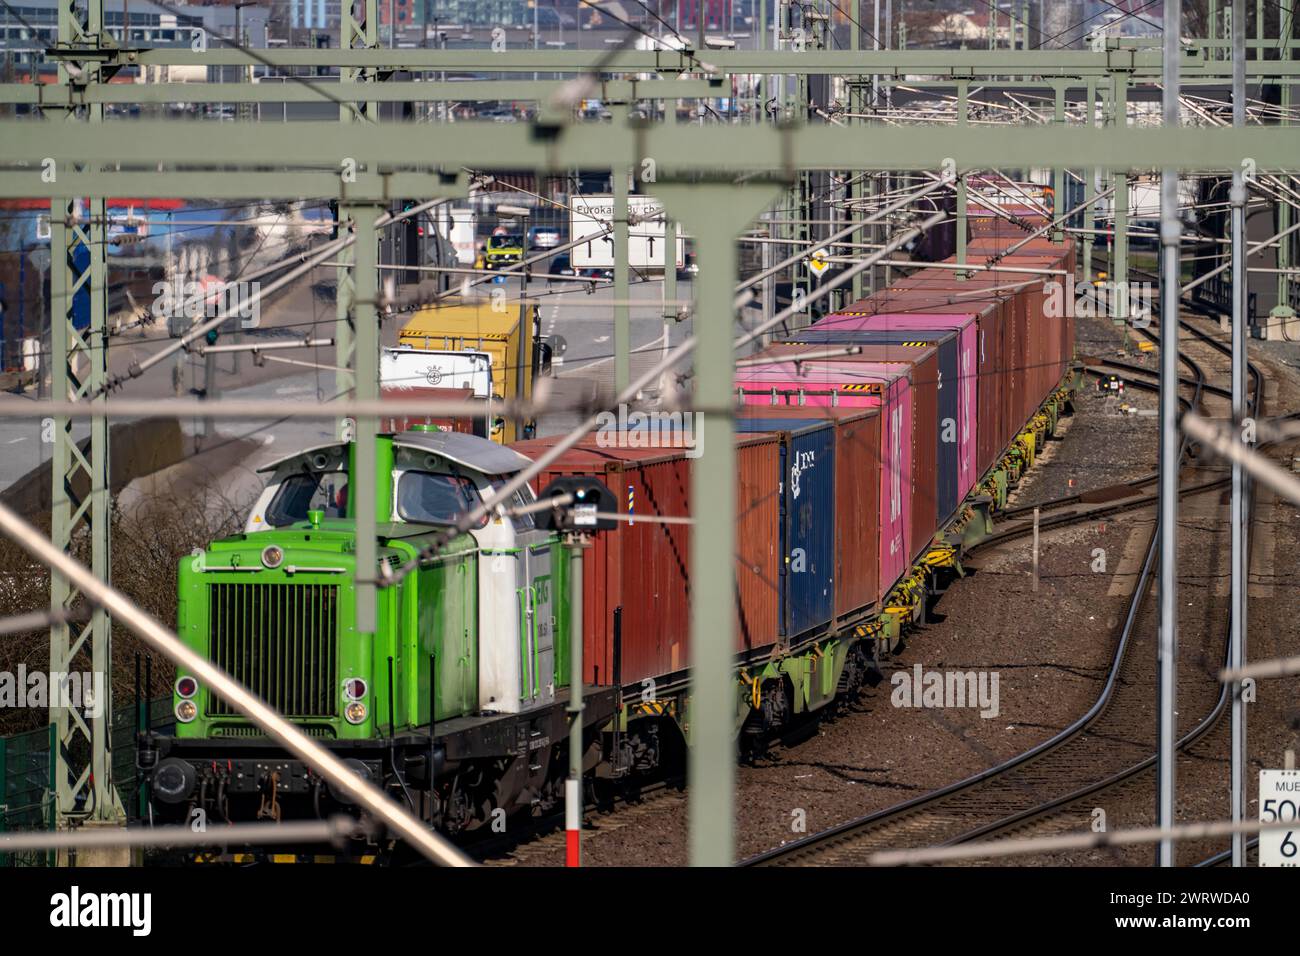 Freight train route to, from HHLA Container Terminal Burchardkai, Hamburg, Germany Stock Photo